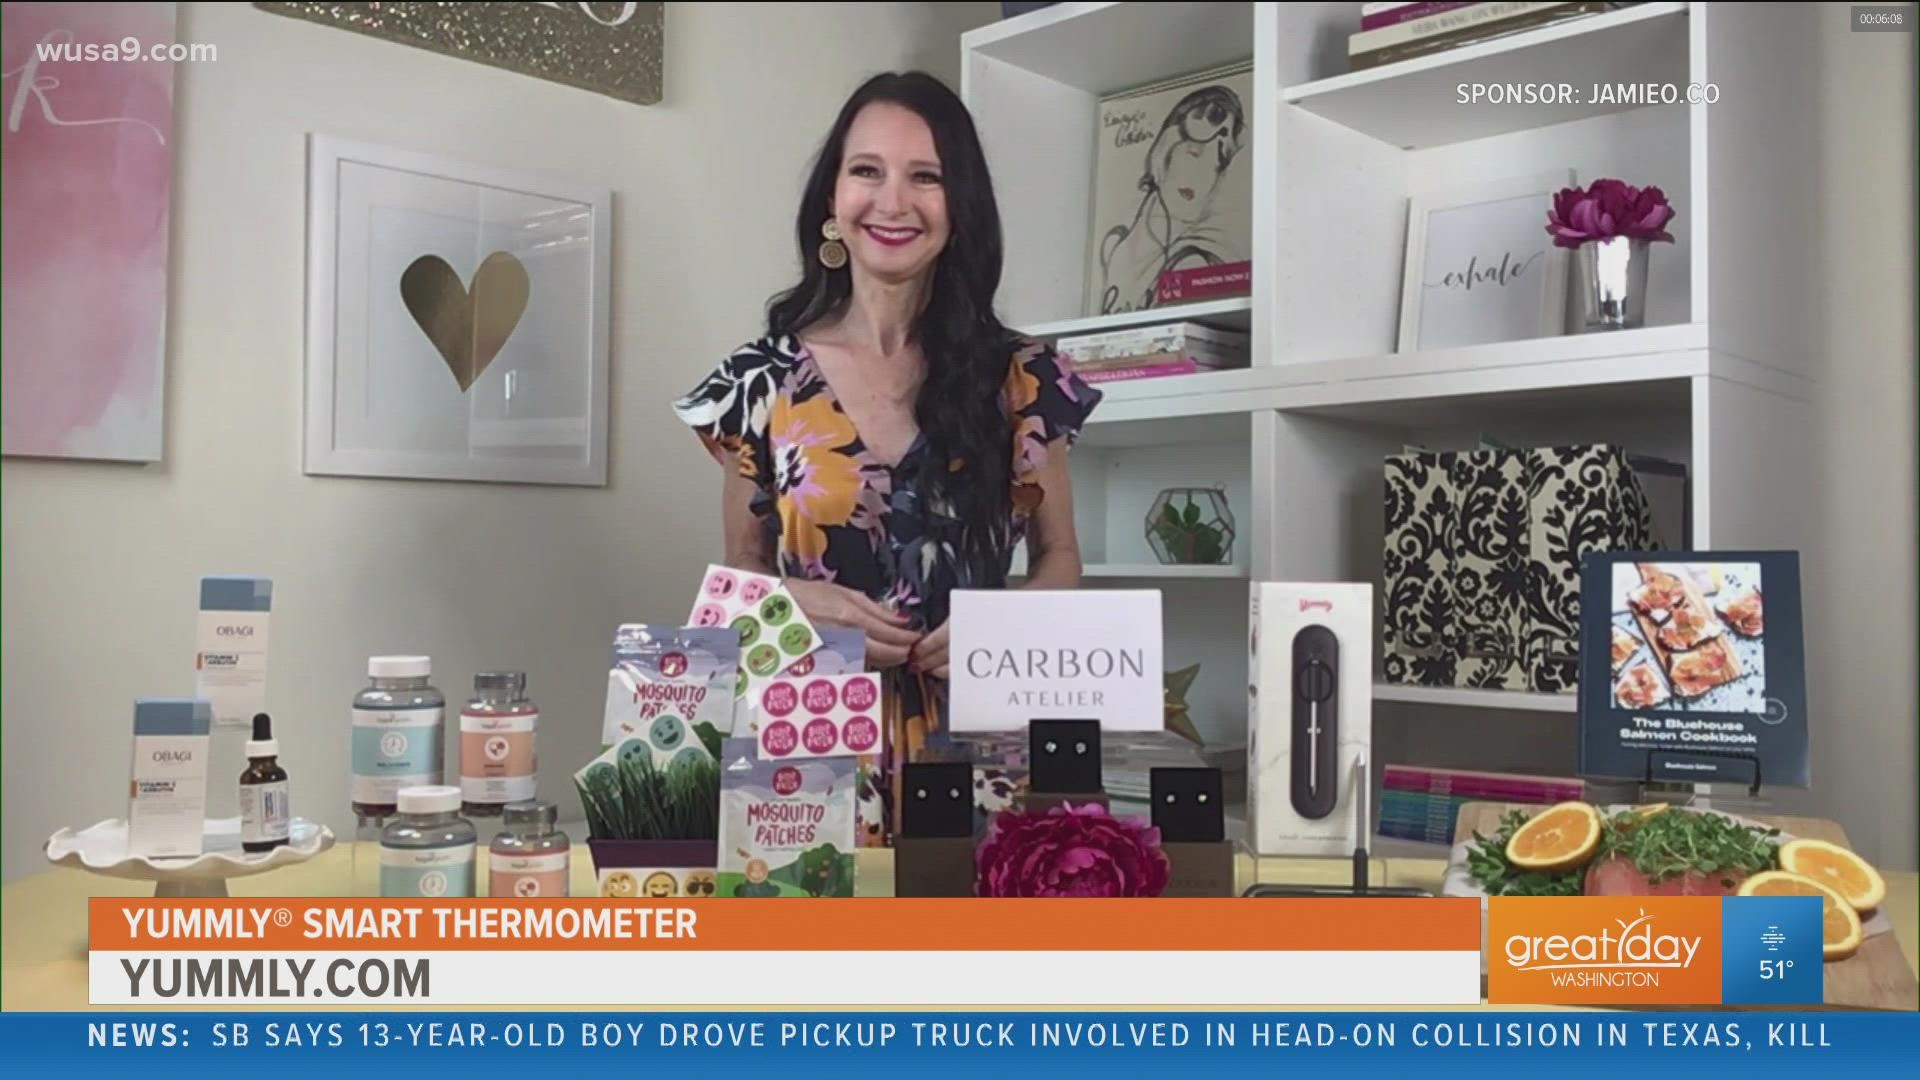 Jamie O'Donnell is back with some spring essentials to help you stay energized and fresh. Sponsored by Jamieo.co.